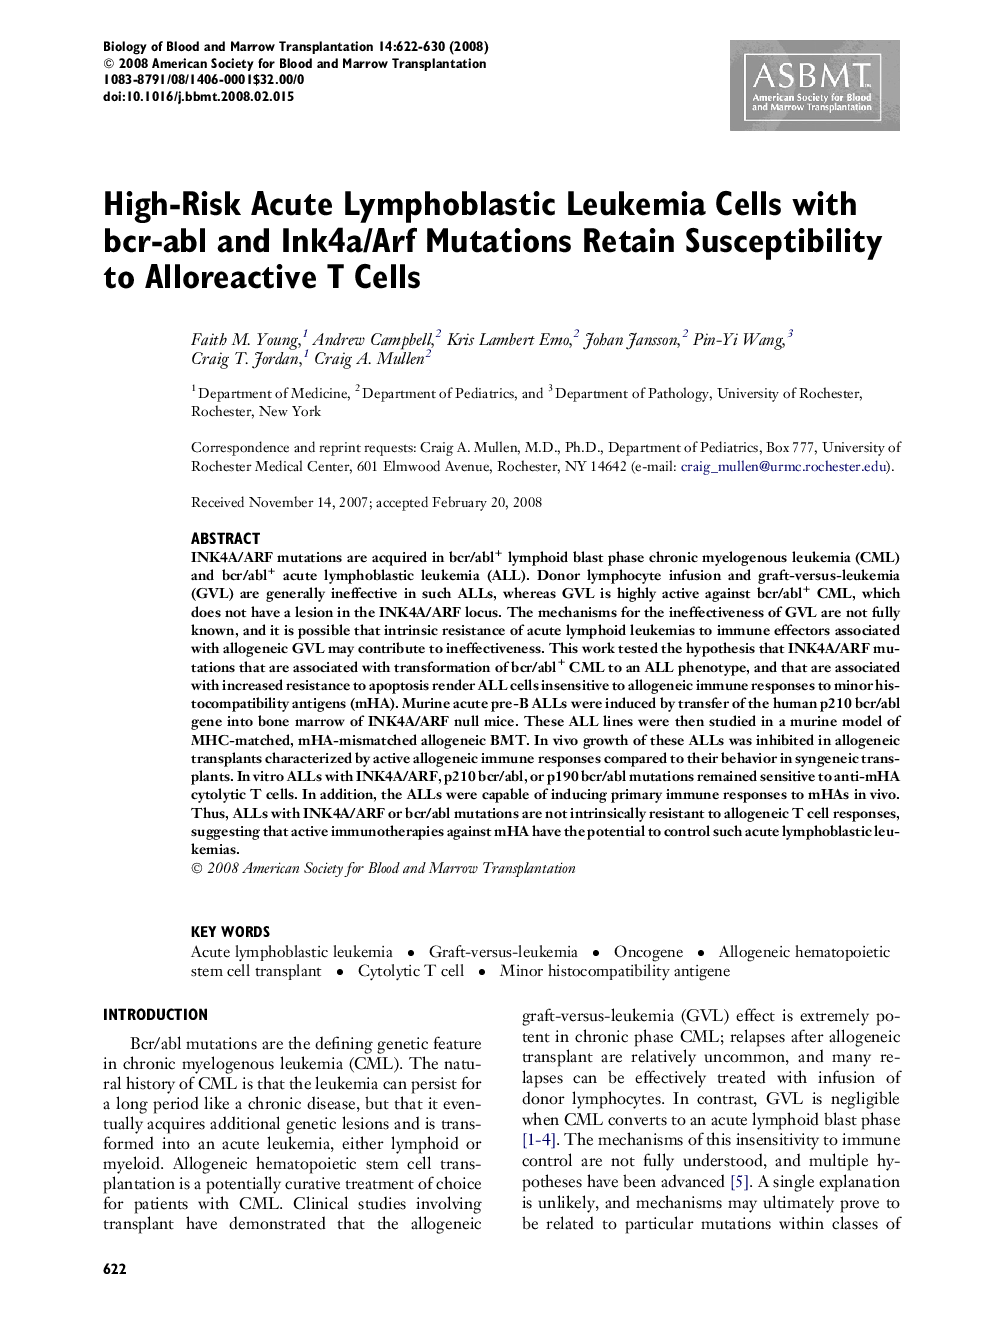 High-Risk Acute Lymphoblastic Leukemia Cells with bcr-abl and Ink4a/Arf Mutations Retain Susceptibility to Alloreactive T Cells